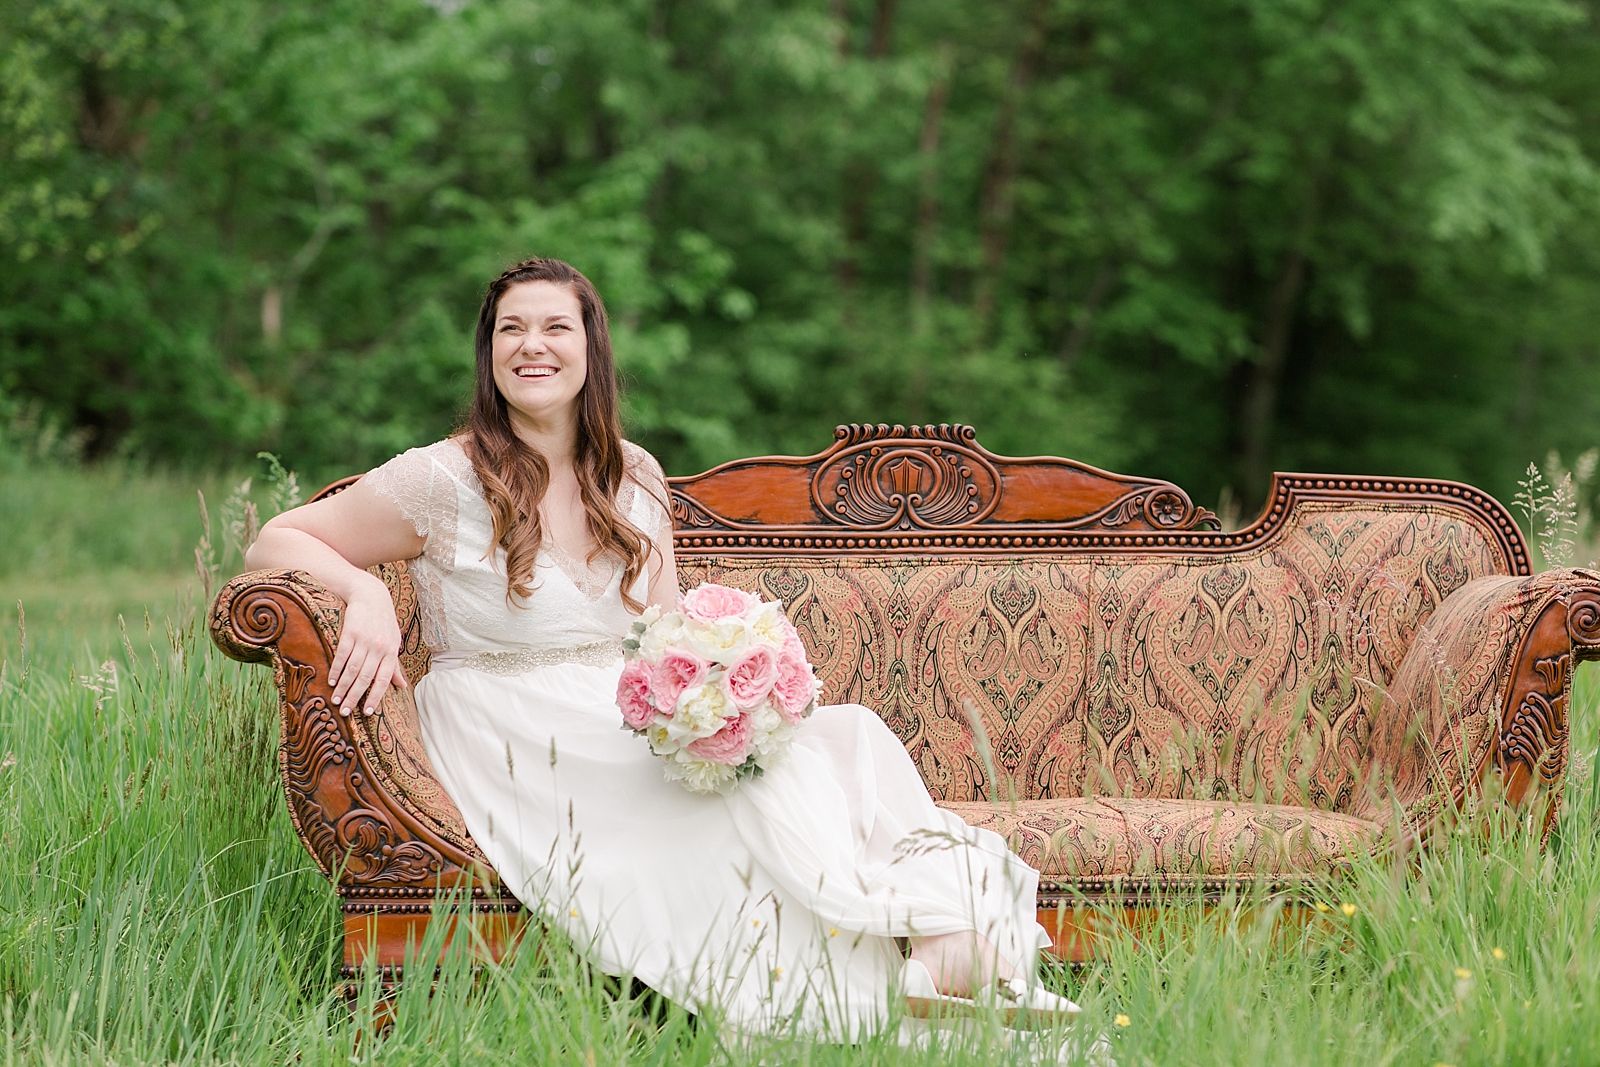 McGuire's Millrace Farm Wedding Bride Smiling on Couch Photo